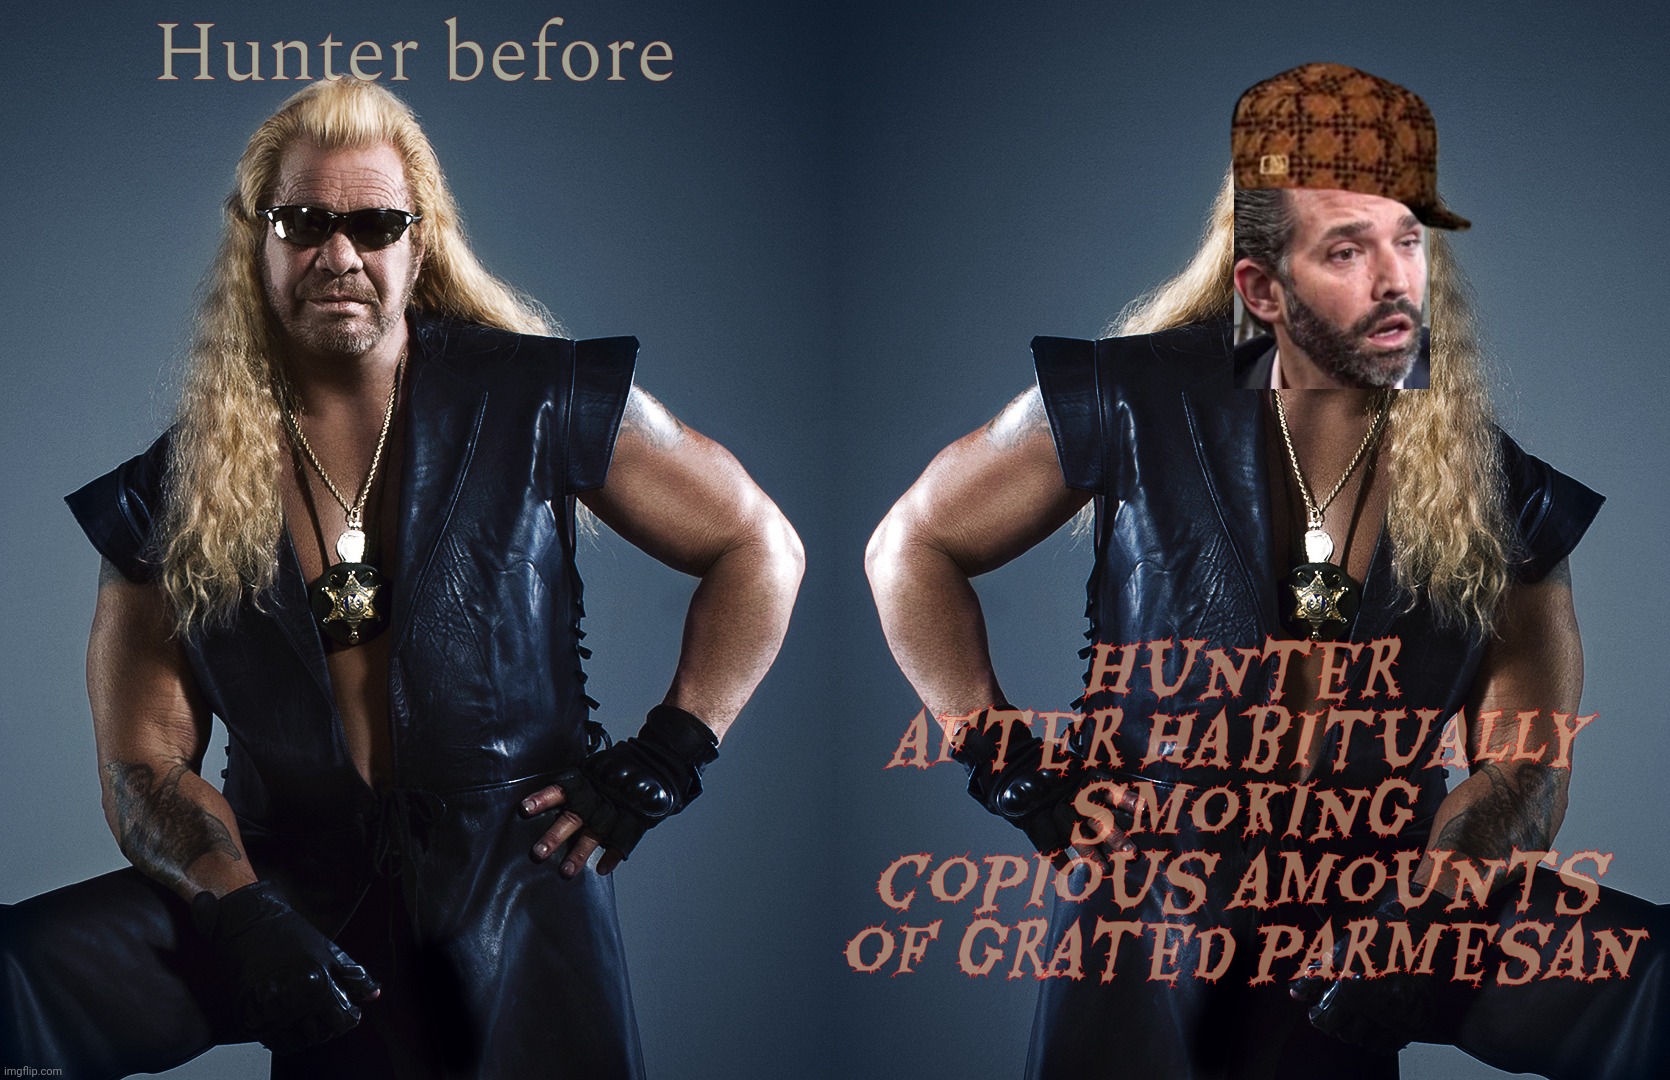 Hunter, get it? | Hunter before Hunter after habitually smoking copious amounts of grated parmesan | image tagged in dog the bounty hunter,donald trump jr,don trump jr coked up,hunter biden,hunter biden smoke that crack,grated parmesan crack | made w/ Imgflip meme maker